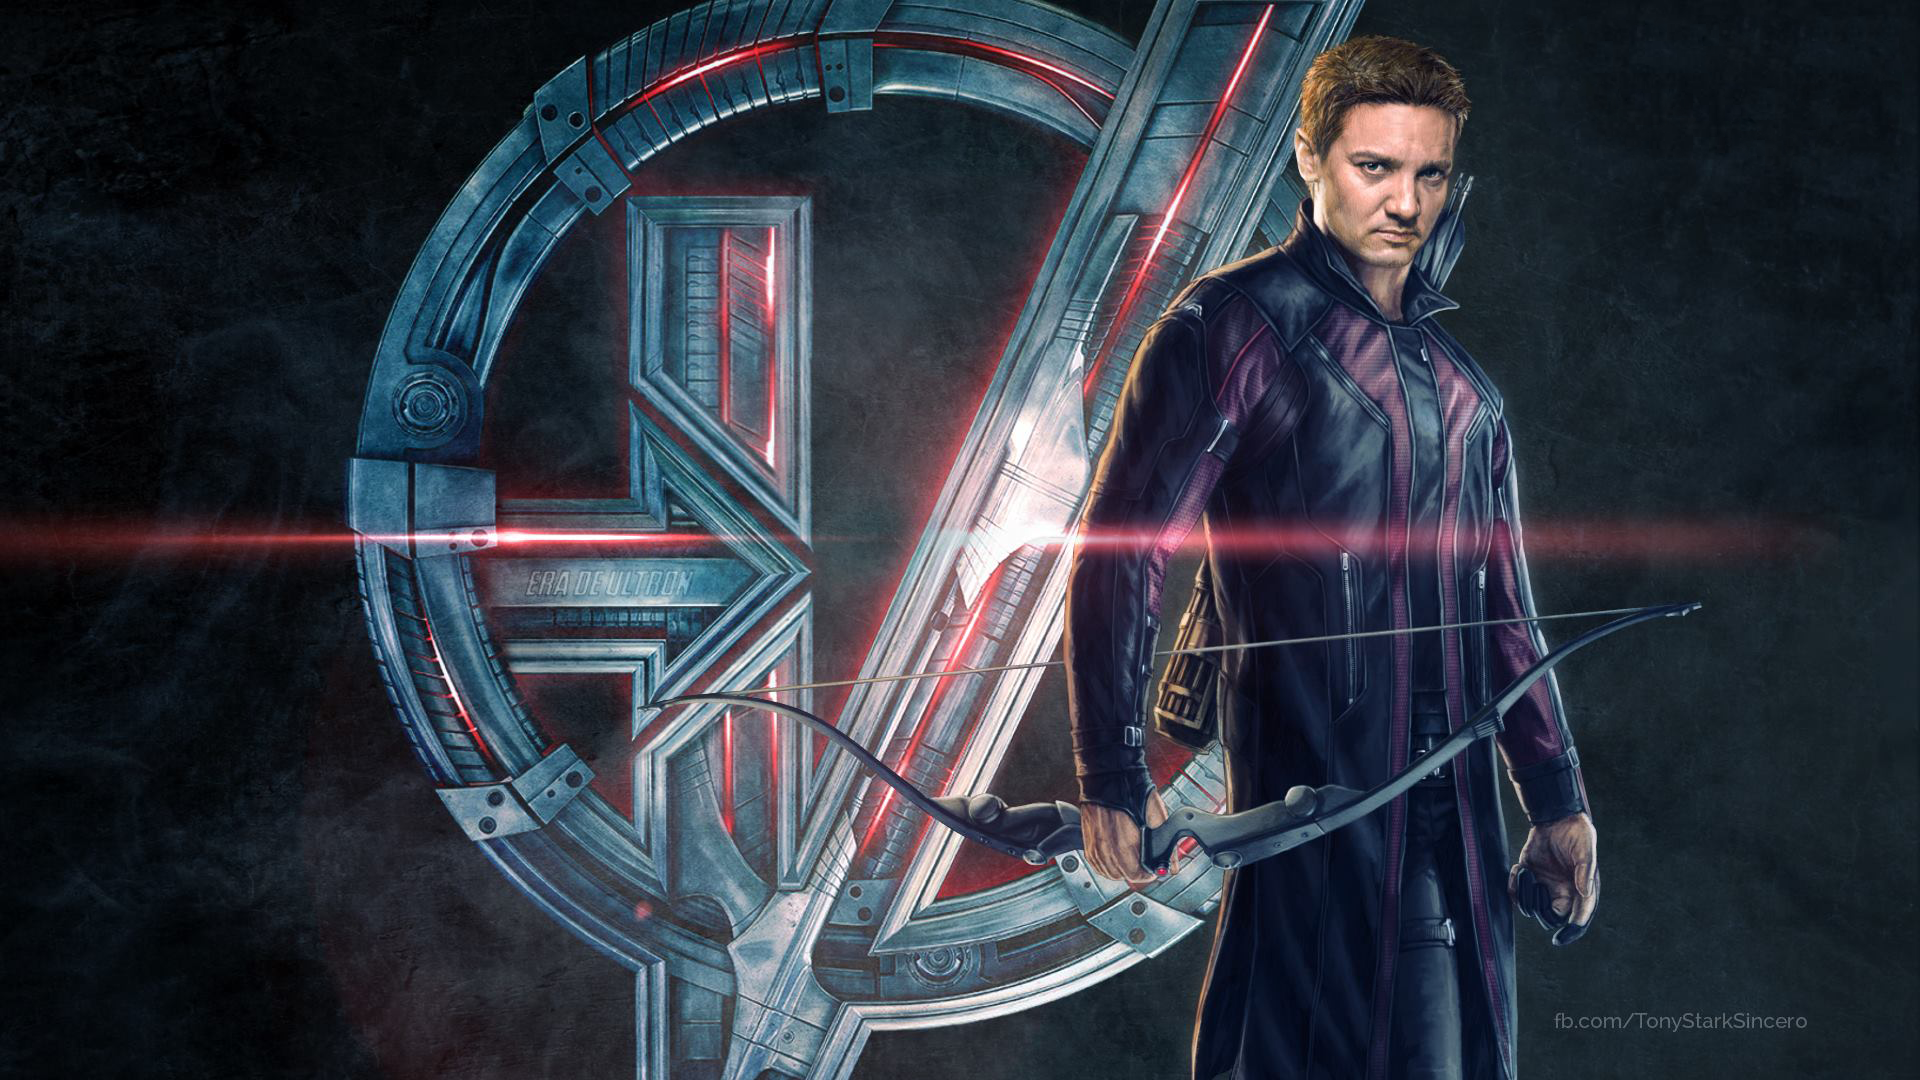 Wallpaper, movies, superhero, concept art, The Avengers, symbols, bow and arrow, Avengers Age of Ultron, Clint Barton, Hawkeye, Jeremy Renner, stage, screenshot, special effects, album cover 1920x1080